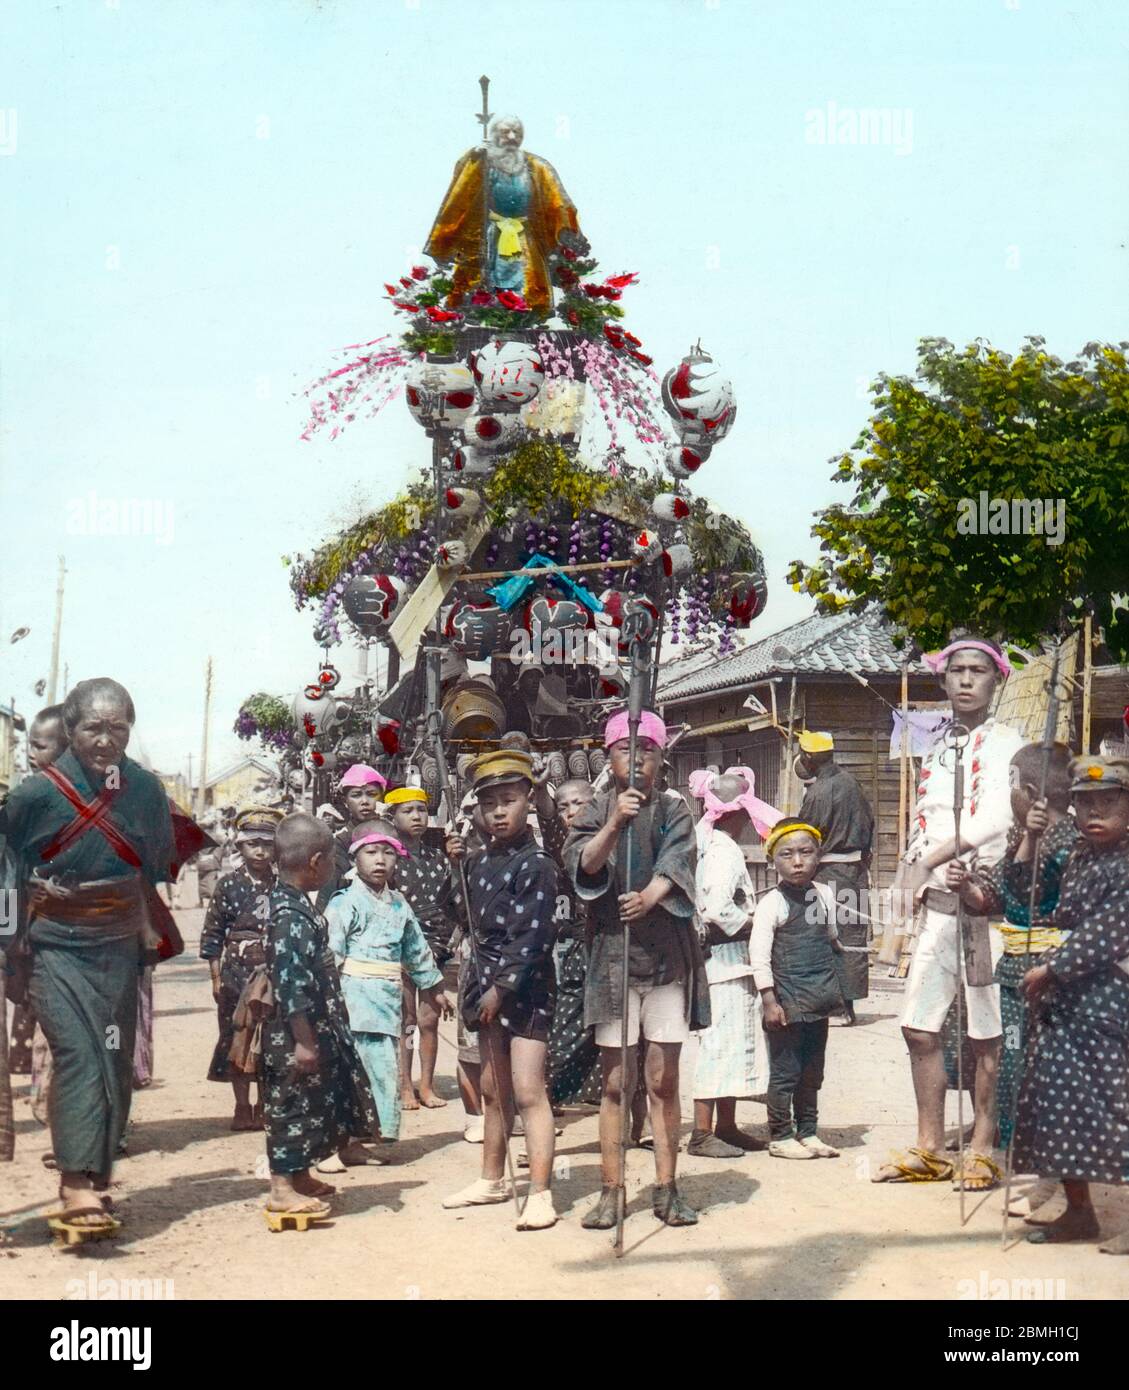 [ 1900s Japan - Japanese Festival Float ] —   A danjiri festival float pulled by children at a matsuri (religious festival).  Original text: 'A decorated car with a musical band on it draw by an ox on the festival day.'  20th century vintage glass slide. Stock Photo